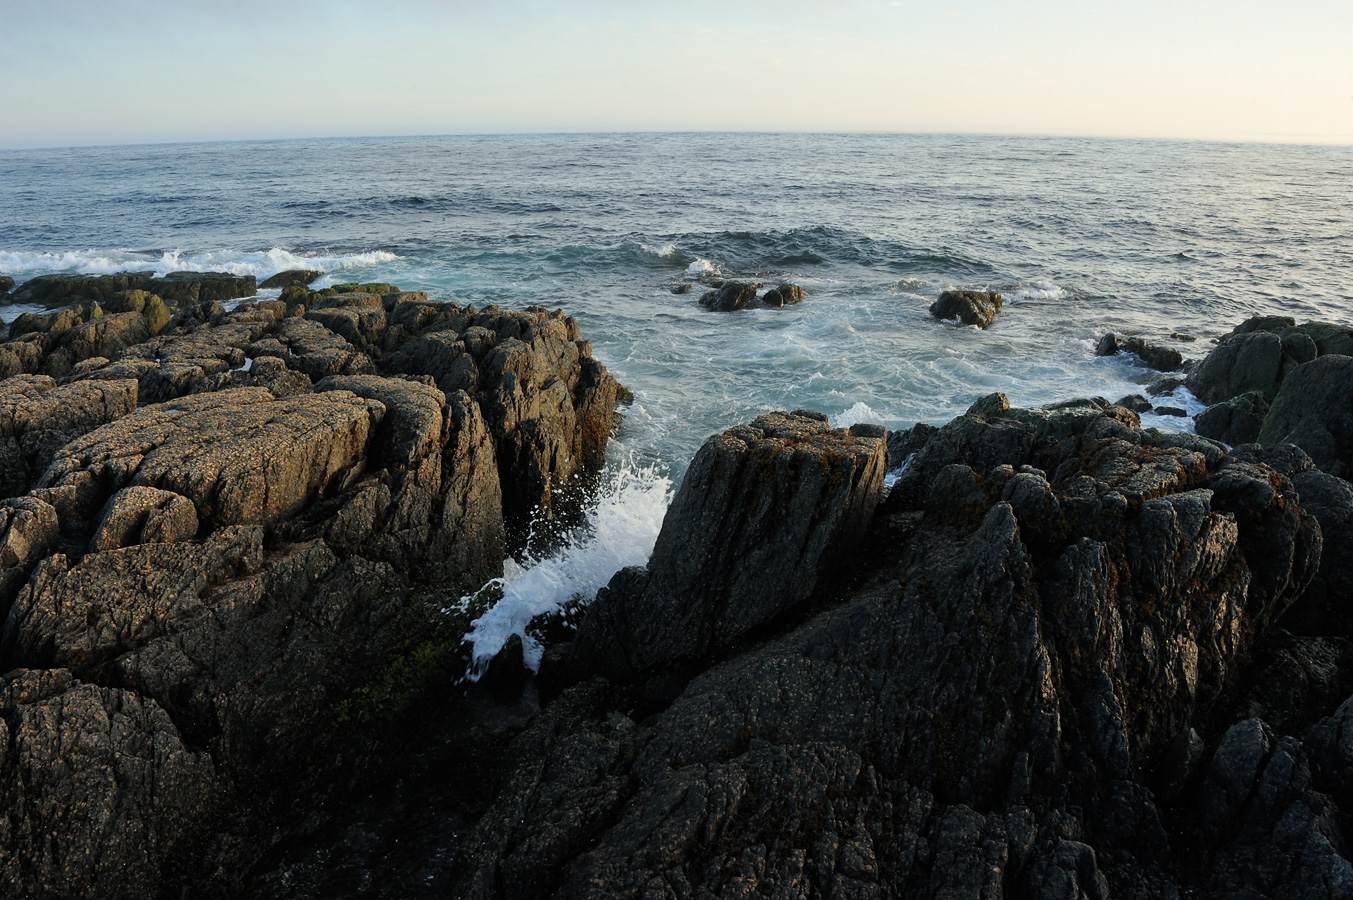 Coast west of Port aux Basques [28 mm, 1/80 sec at f / 13, ISO 400]